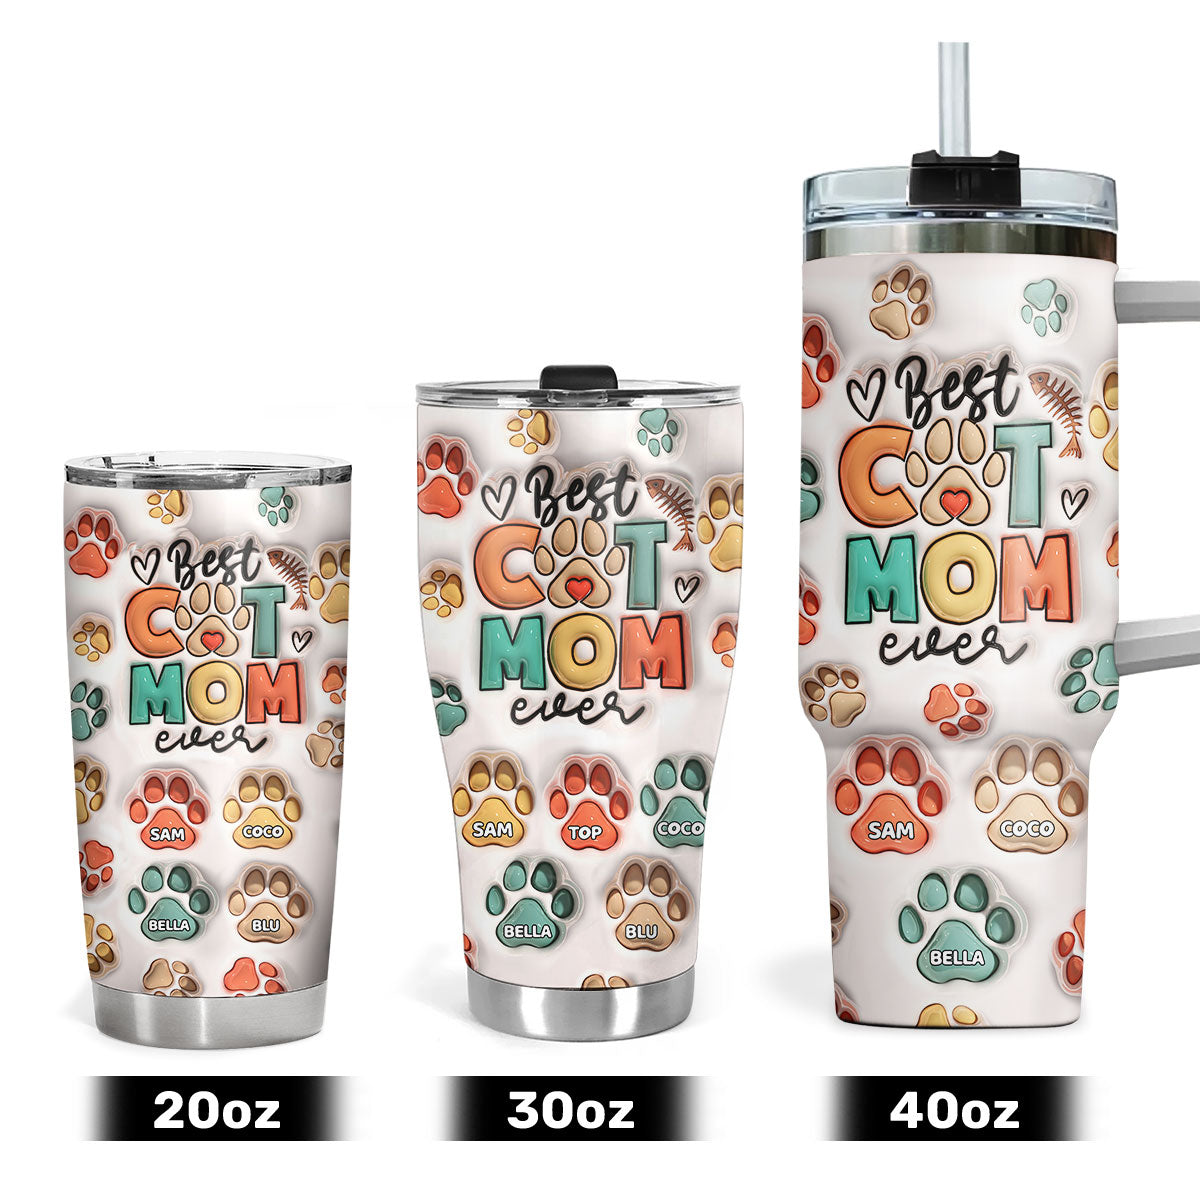 Best Cat Mom | Personalized Stainless Steel Tumbler SSTH848